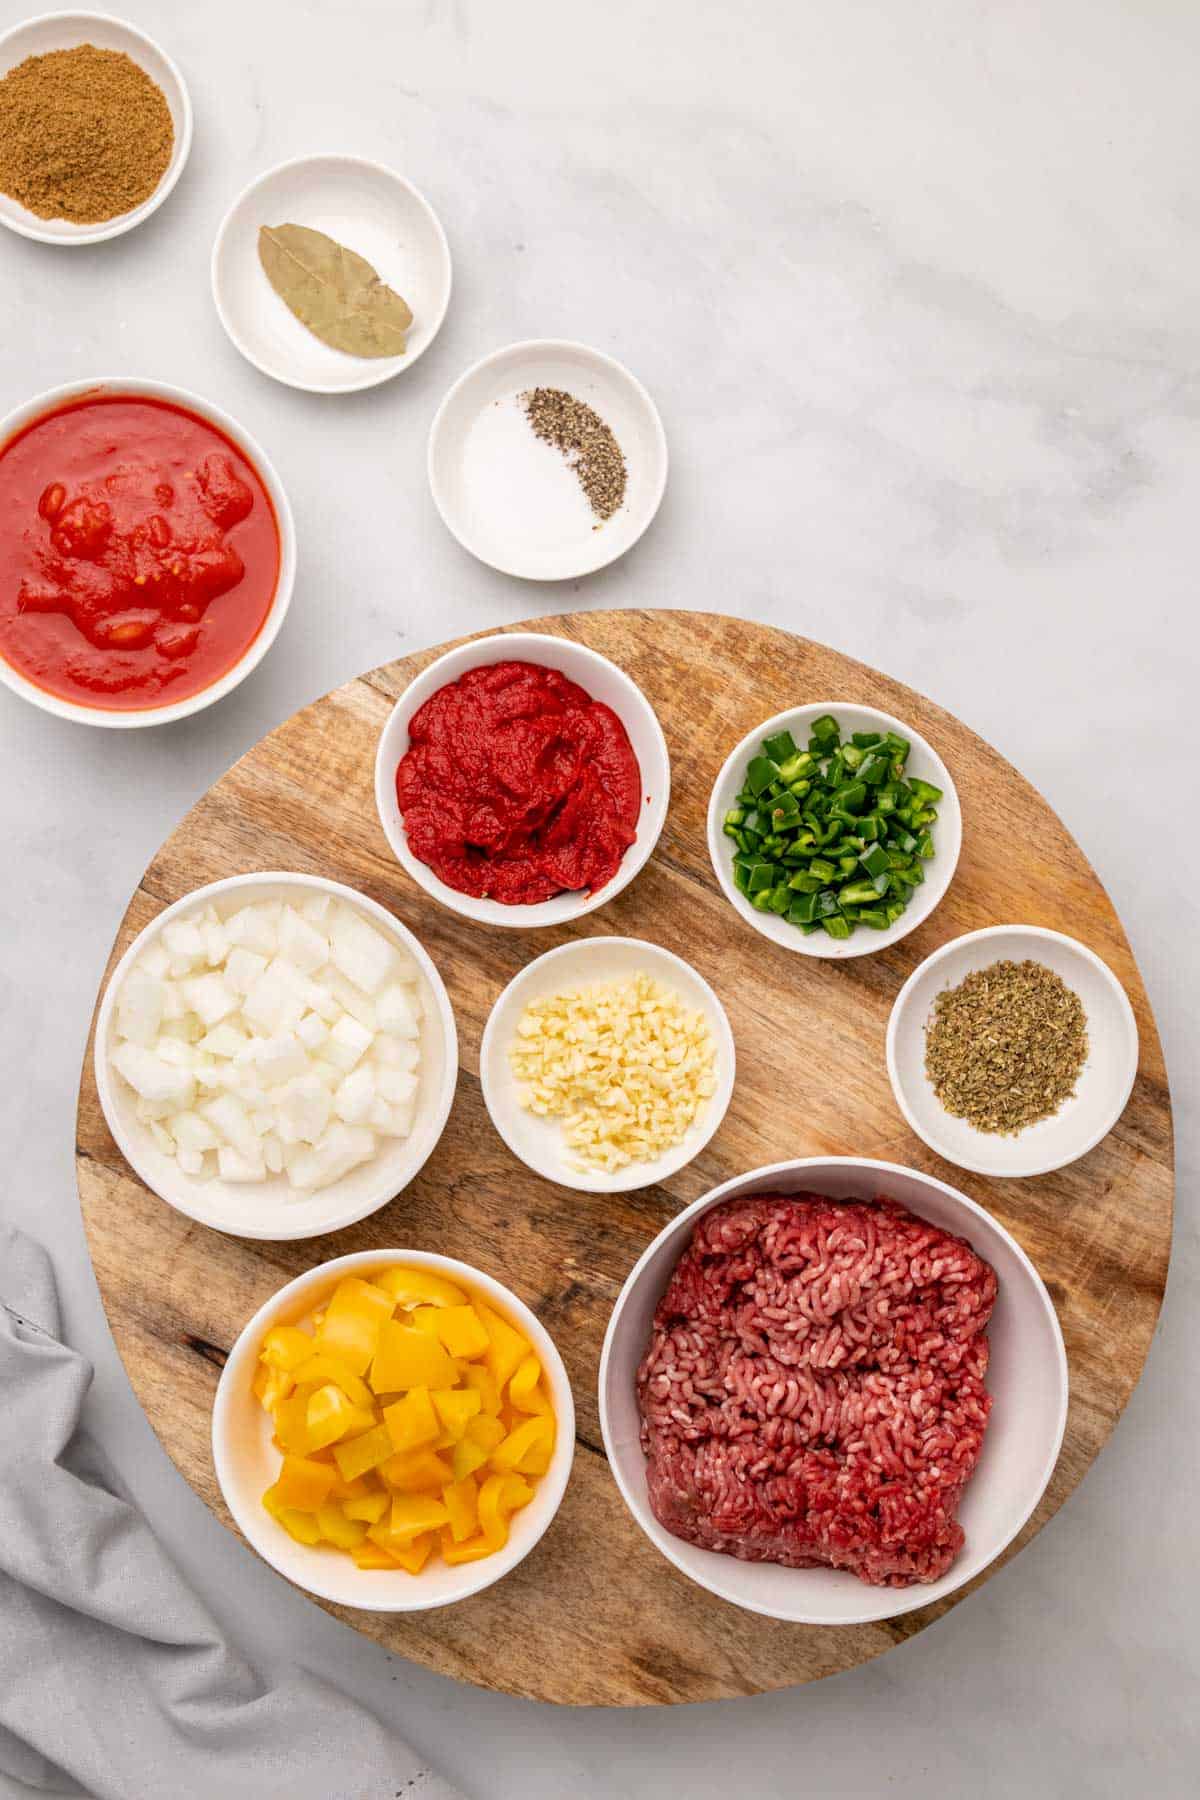 Ingredients for chili in separate ramekins, as seen from above